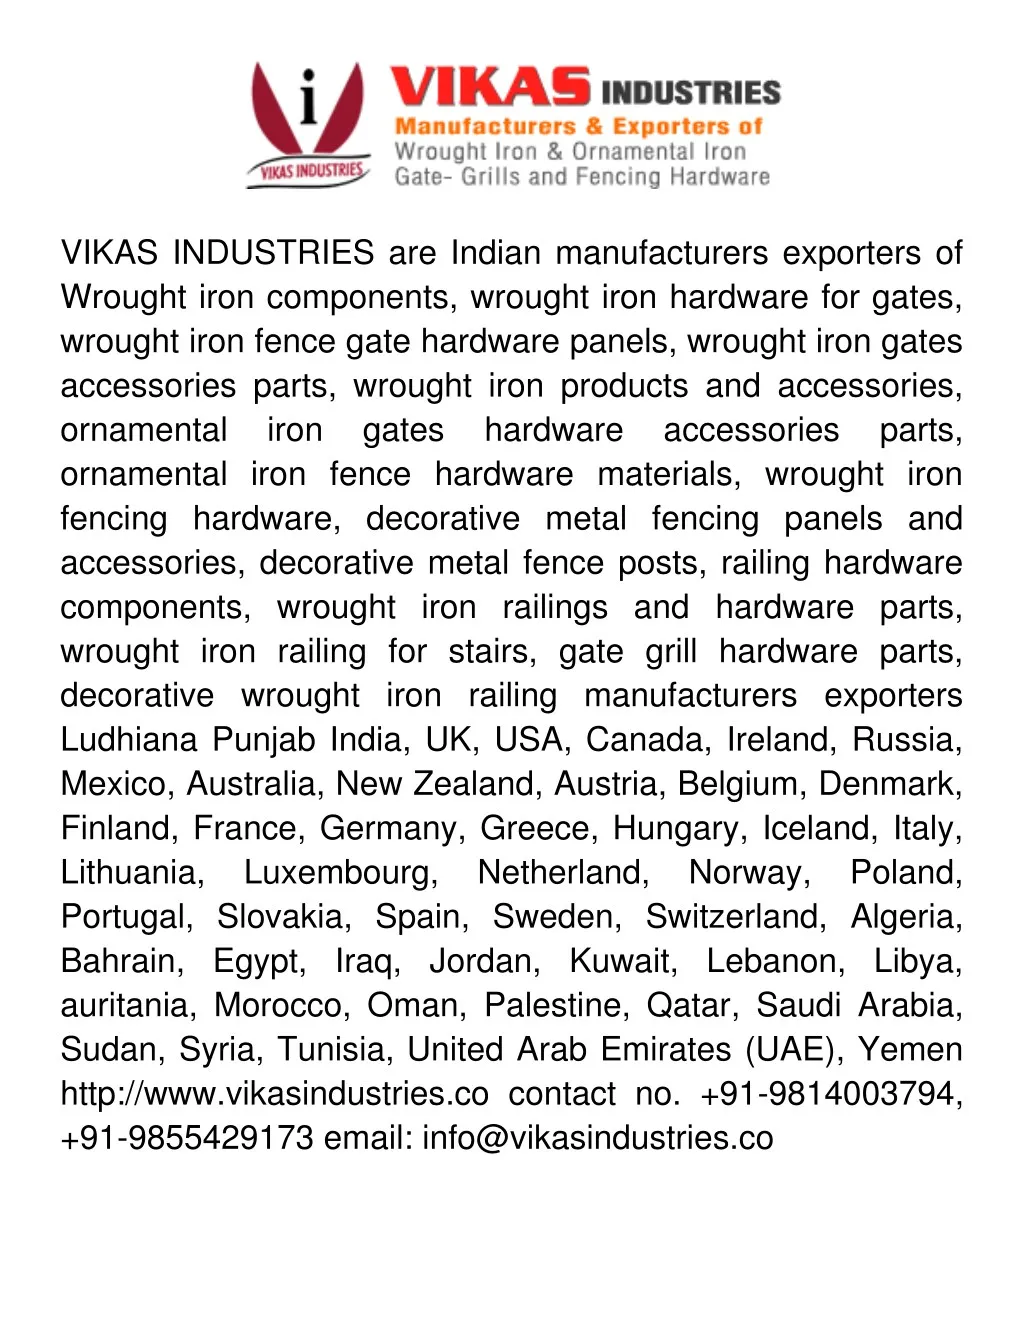 vikas industries are indian manufacturers